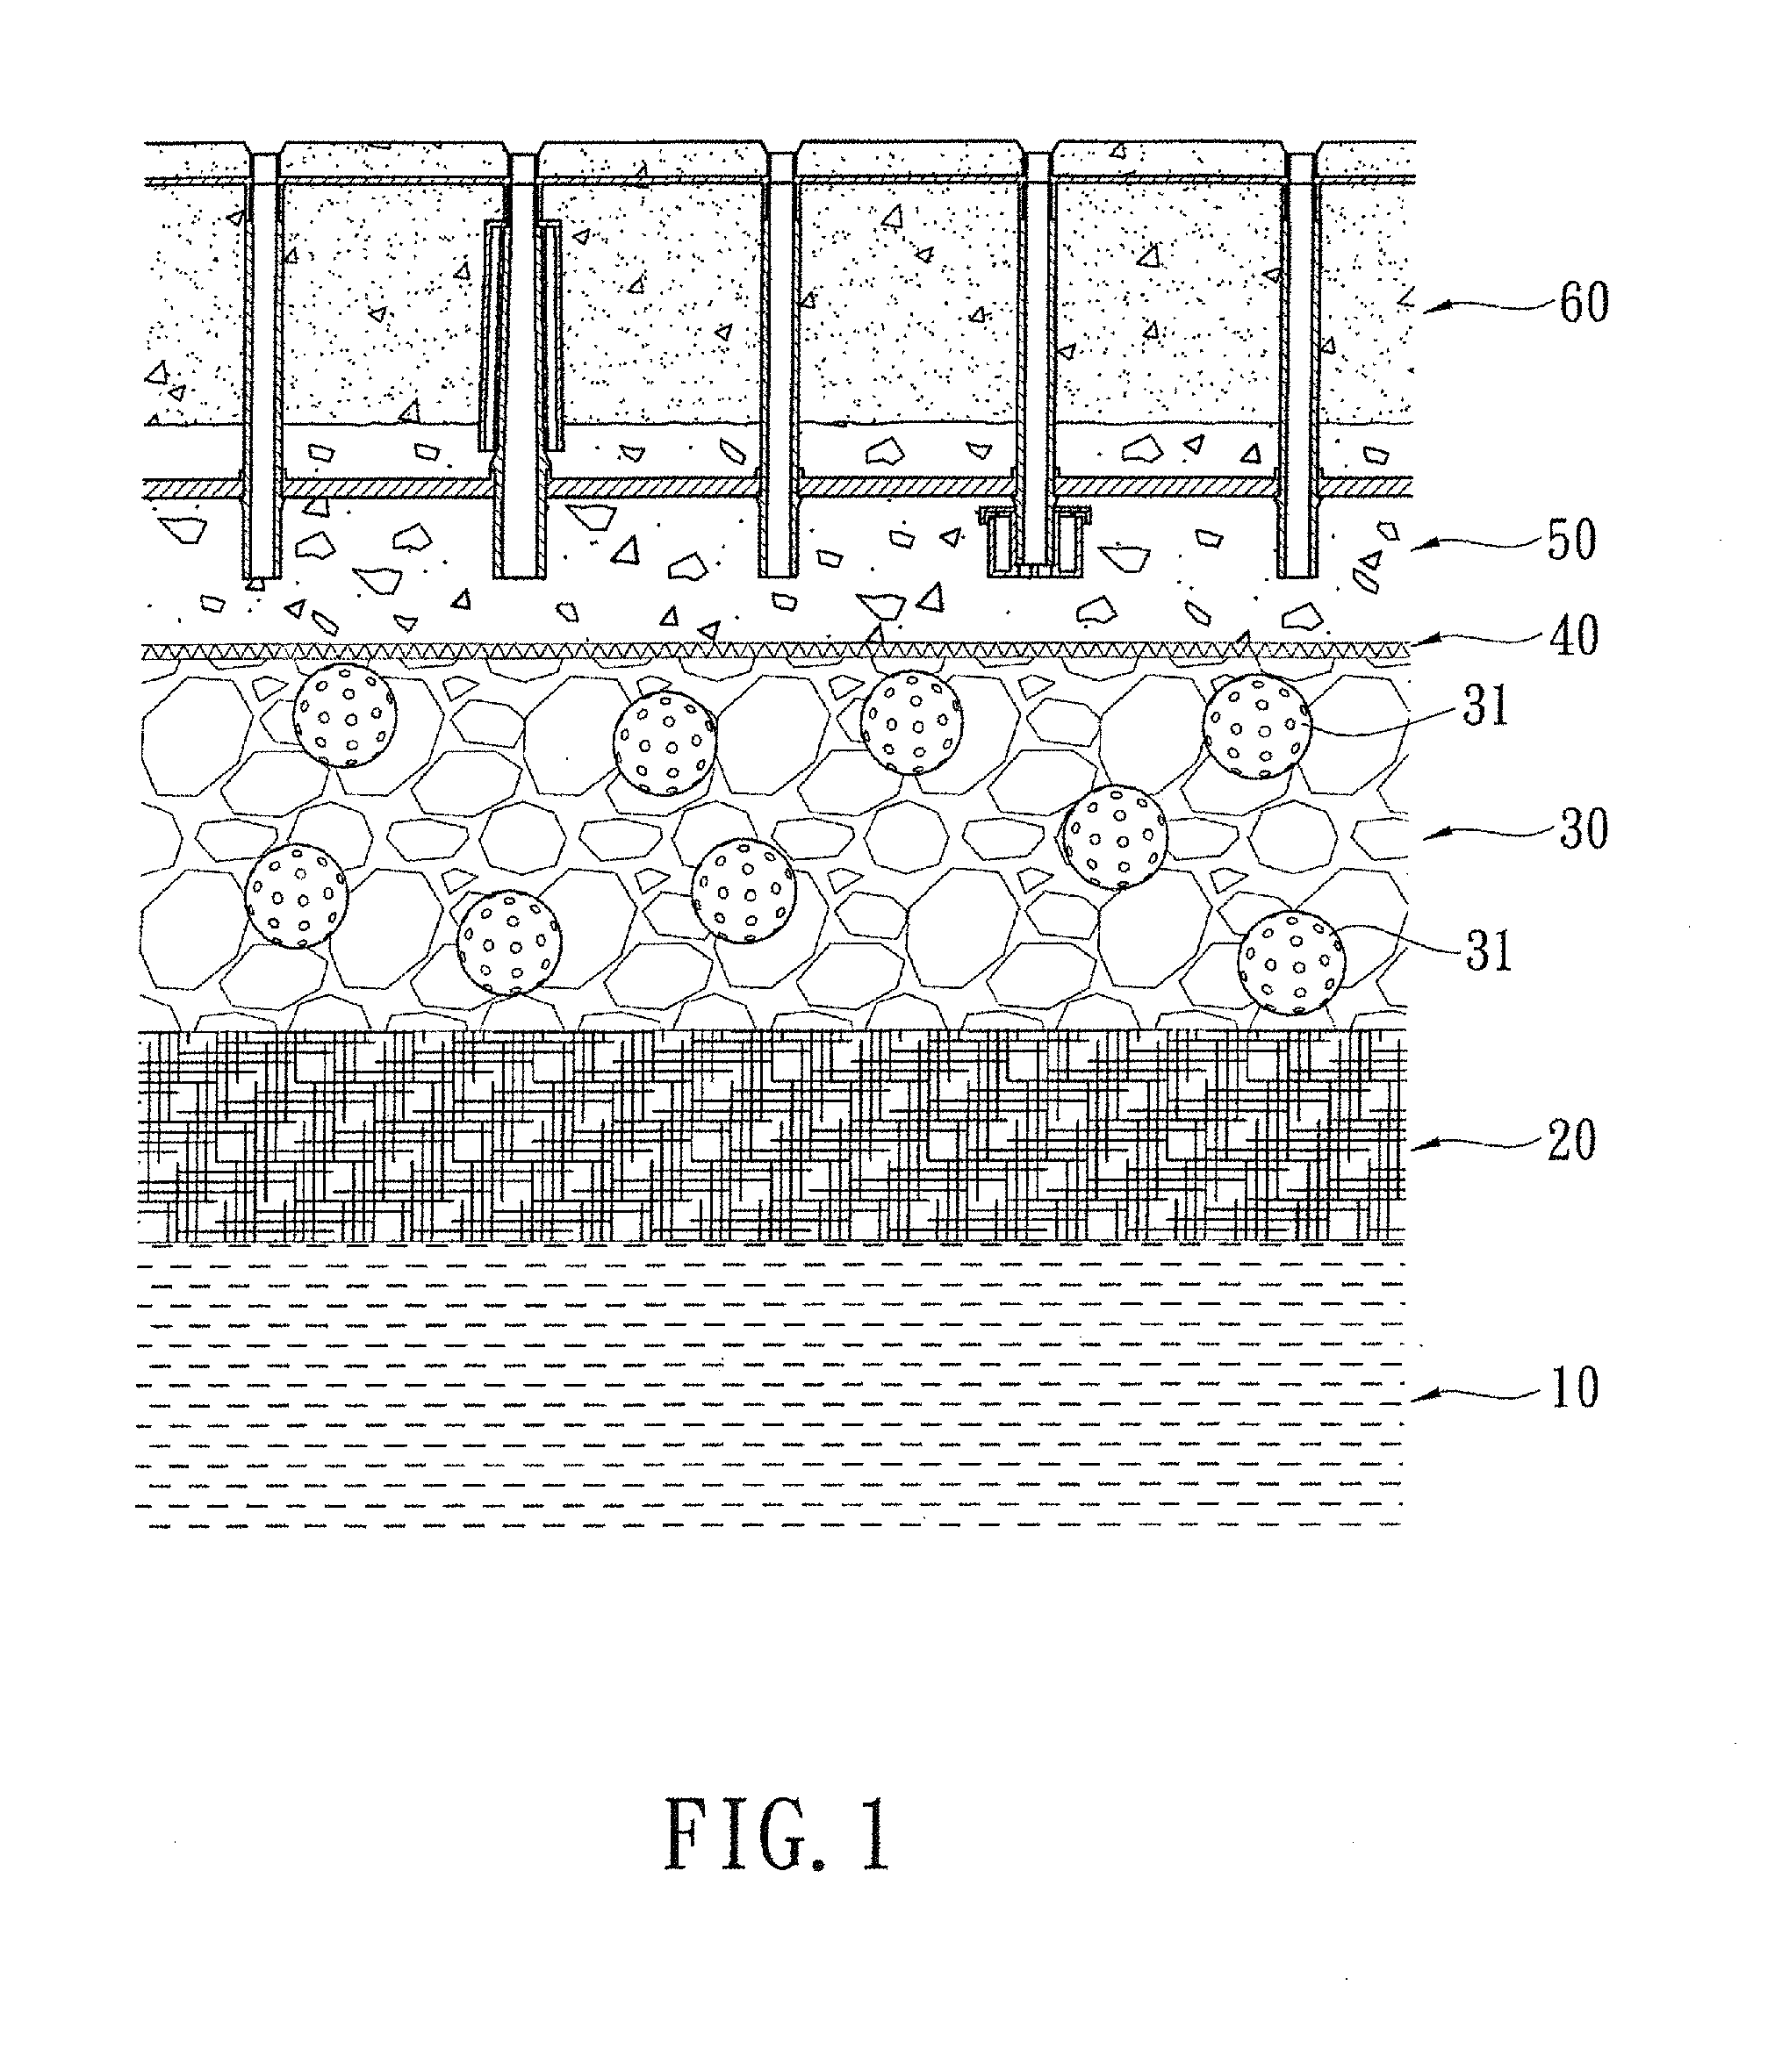 Method for manufacturing geological gradation featuring disaster prevention and ecologic function